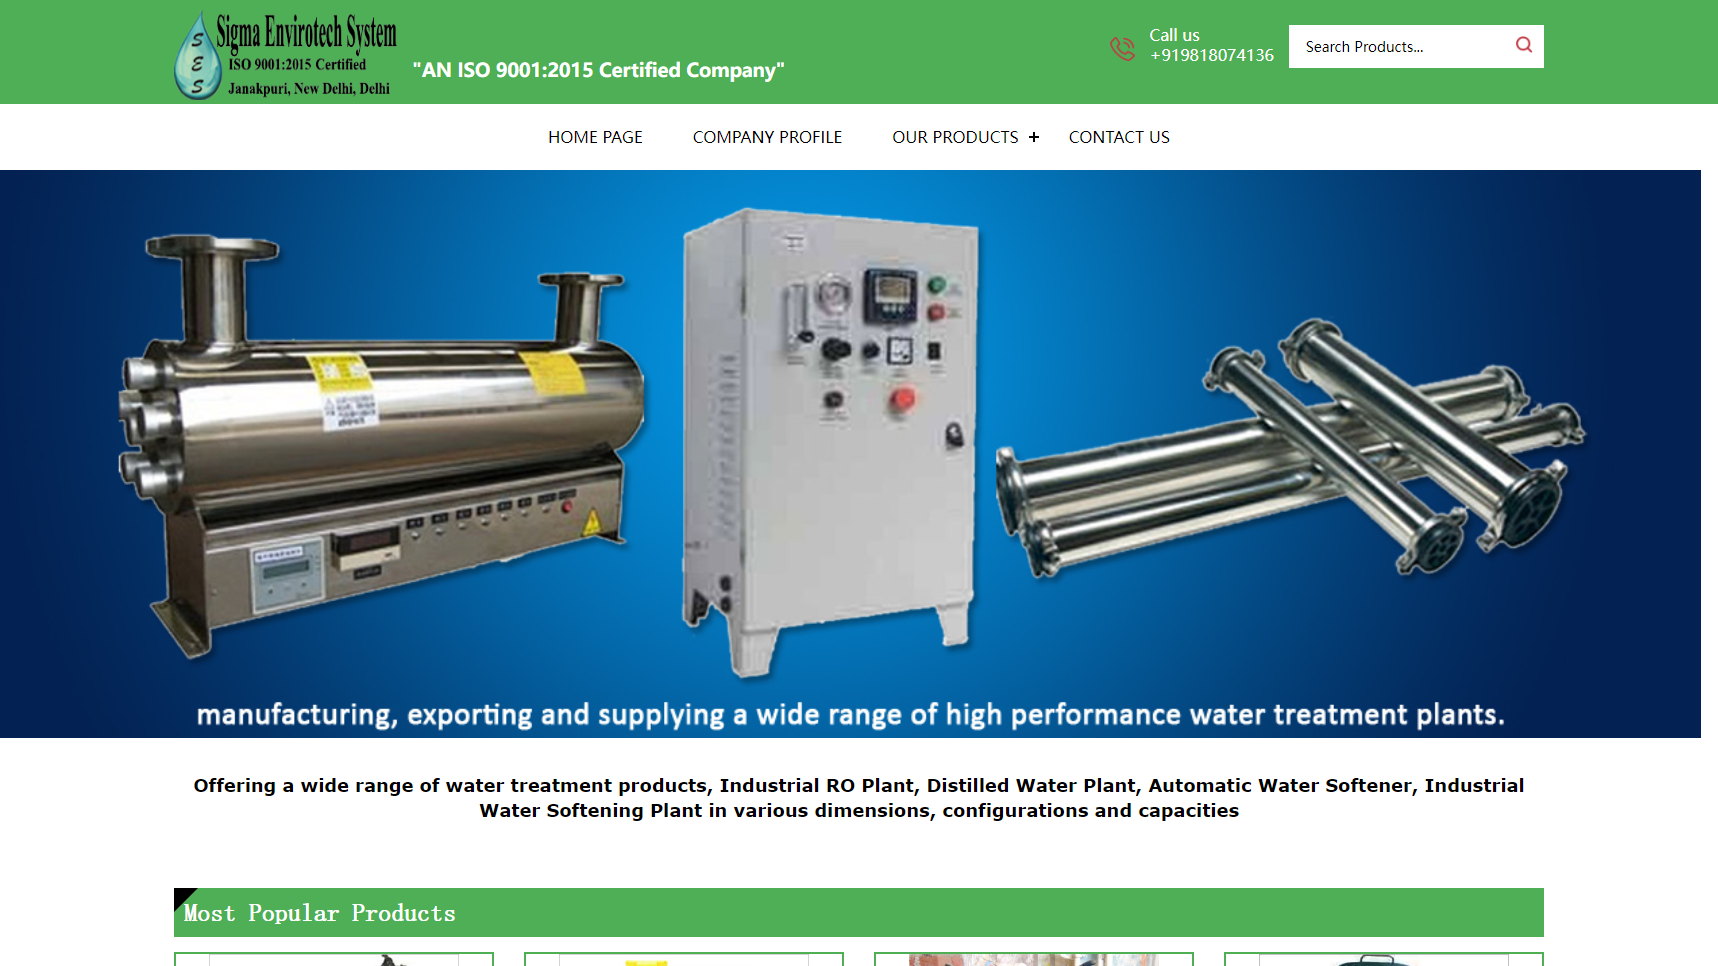 Sigma Envirotech System - Industrial RO Plant Manufacturer